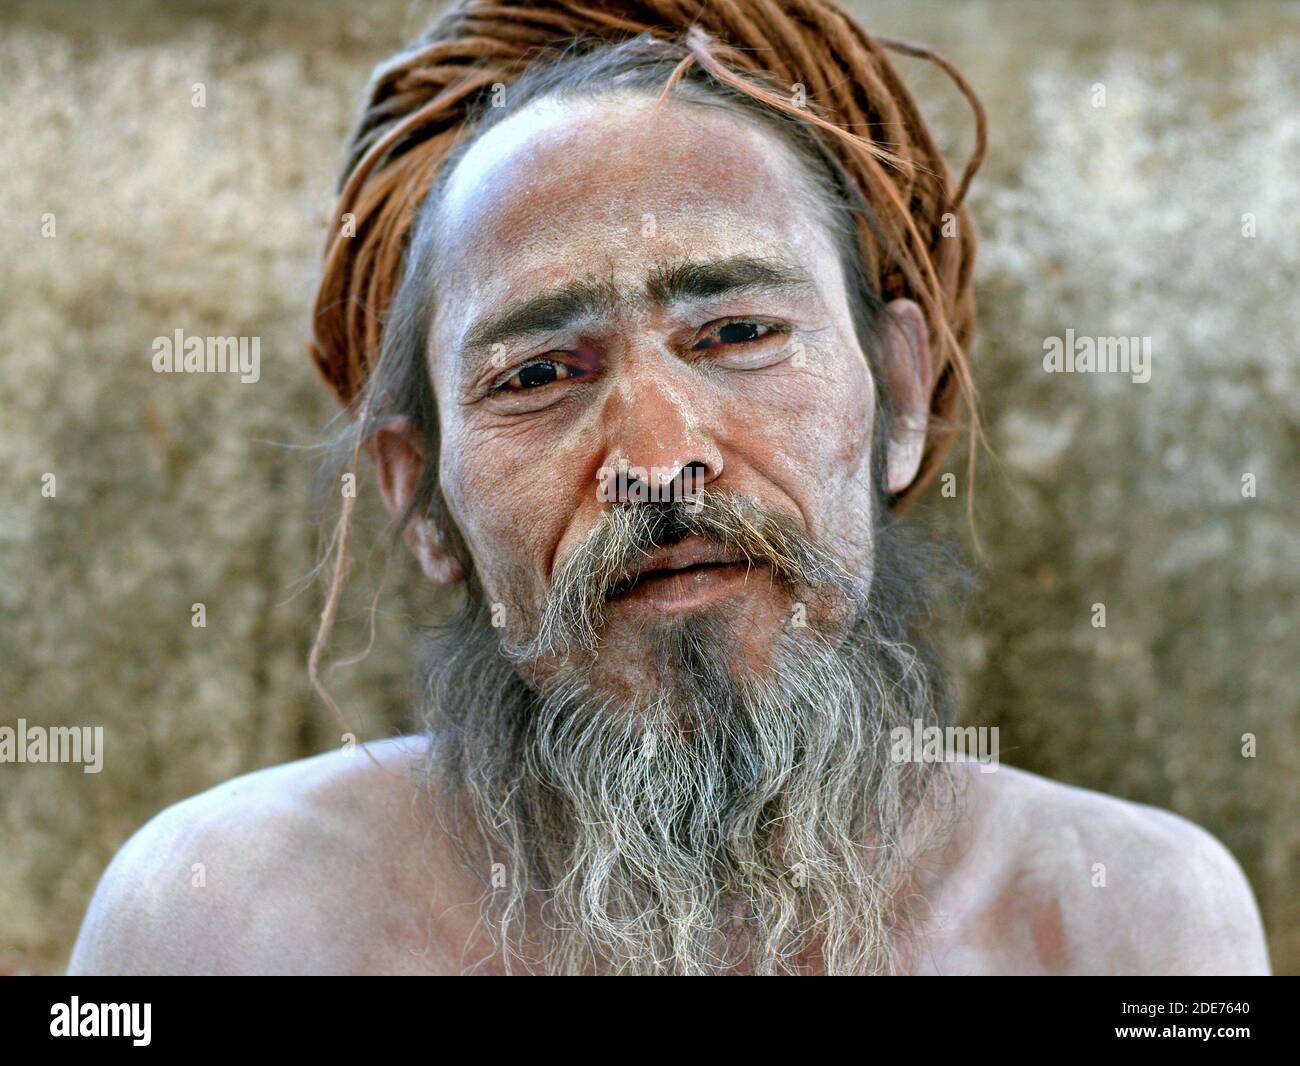 Spiritual Indian Hindu sadhu baba with white sacred ash all over his face and shoulders and with rolled-up long dreadlocks poses for the camera. Stock Photo